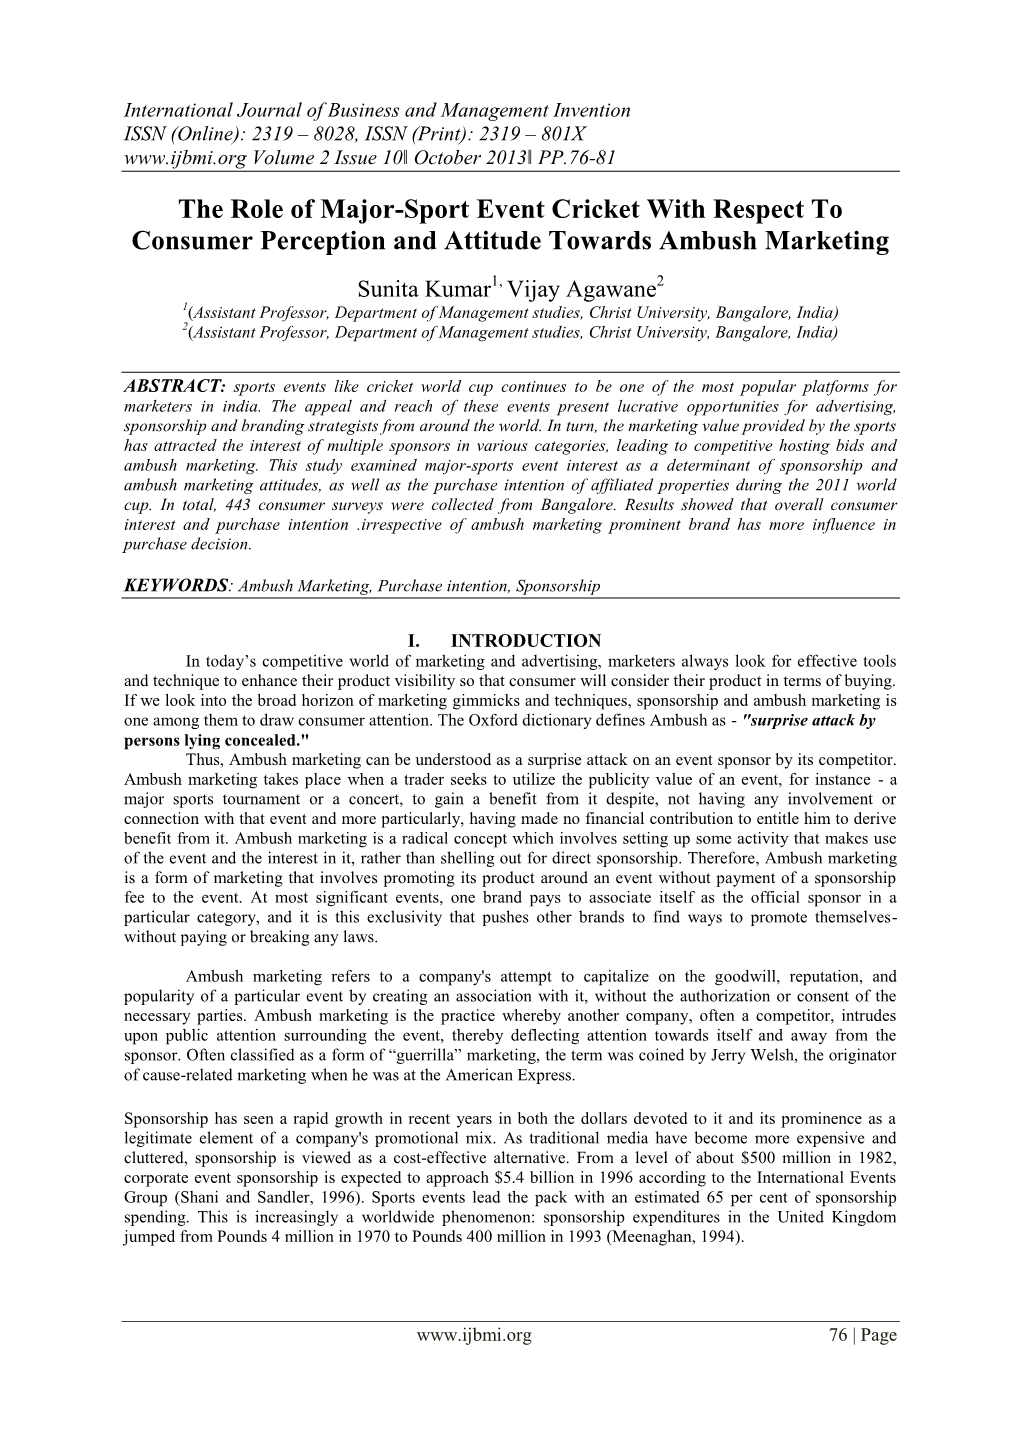 The Role of Major-Sport Event Cricket with Respect to Consumer Perception and Attitude Towards Ambush Marketing